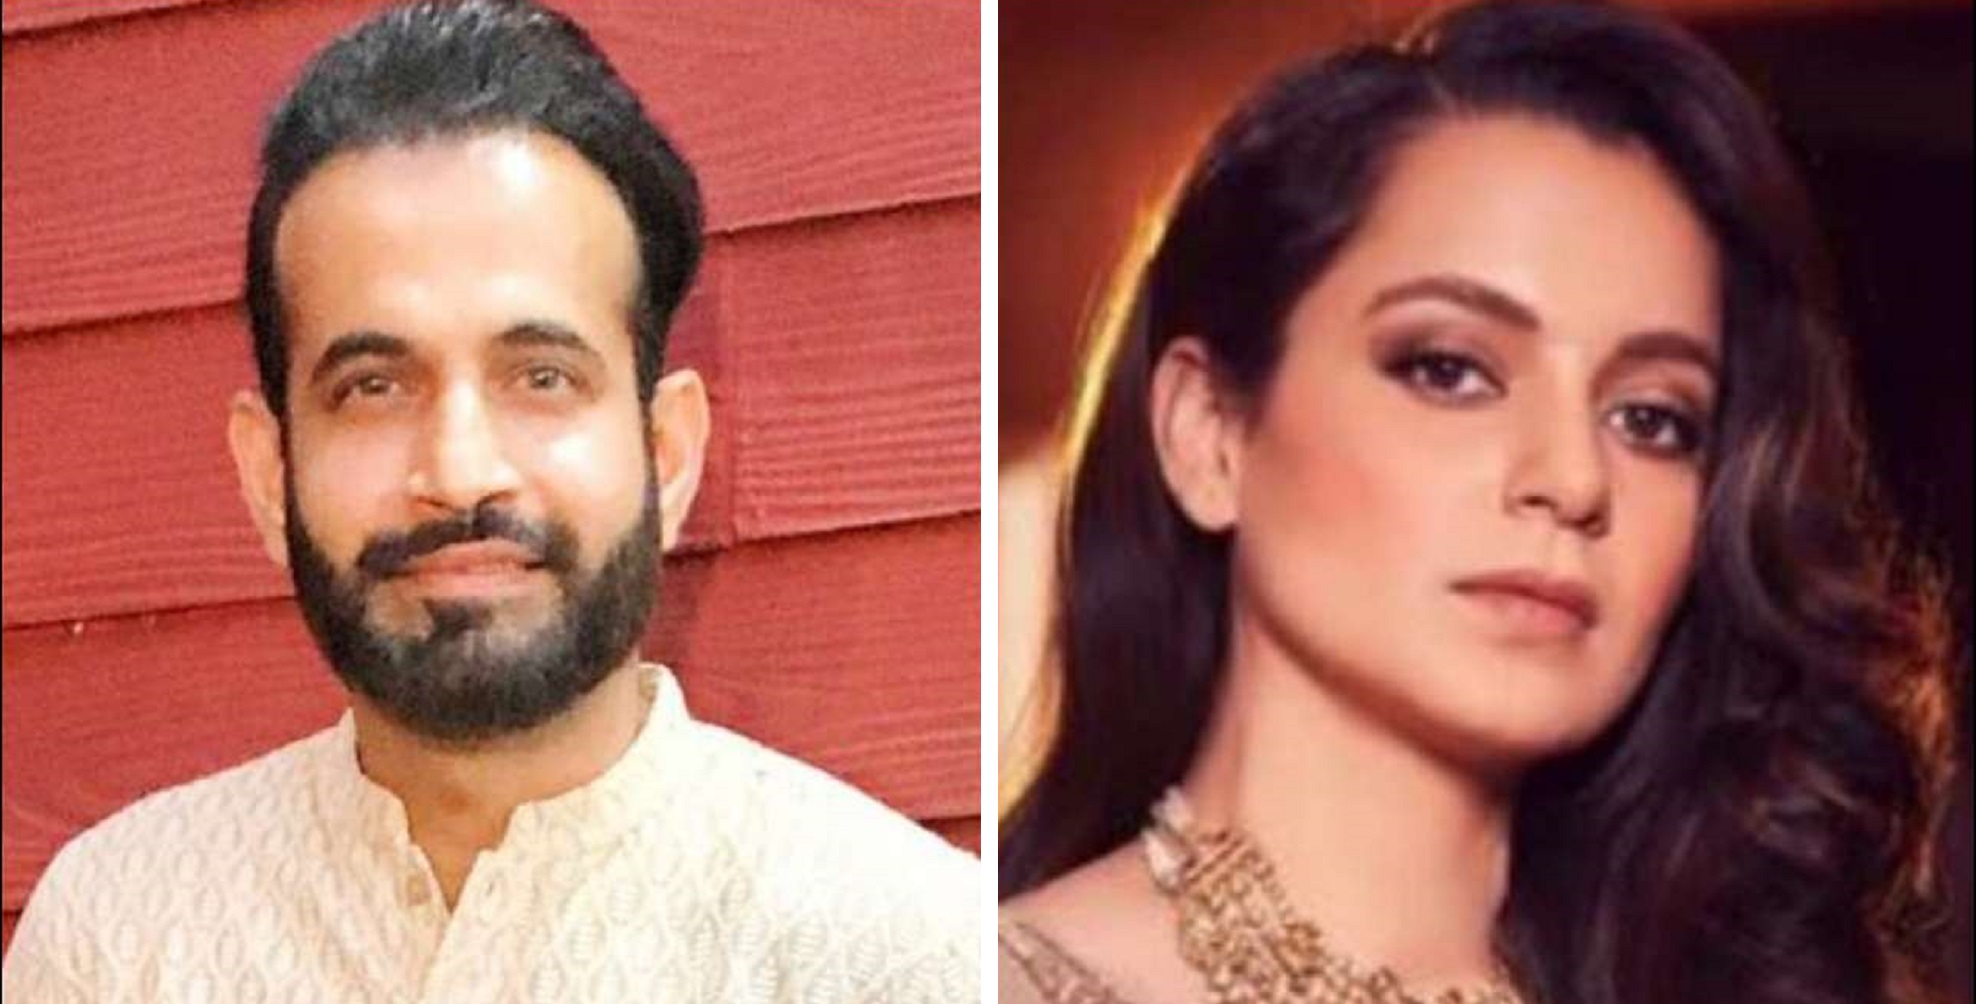 Irfan Pathan Lashes Out at Kangana Ranaut For ‘Spreading Hatred’ After She Questioned His Silence On Bengal Violence